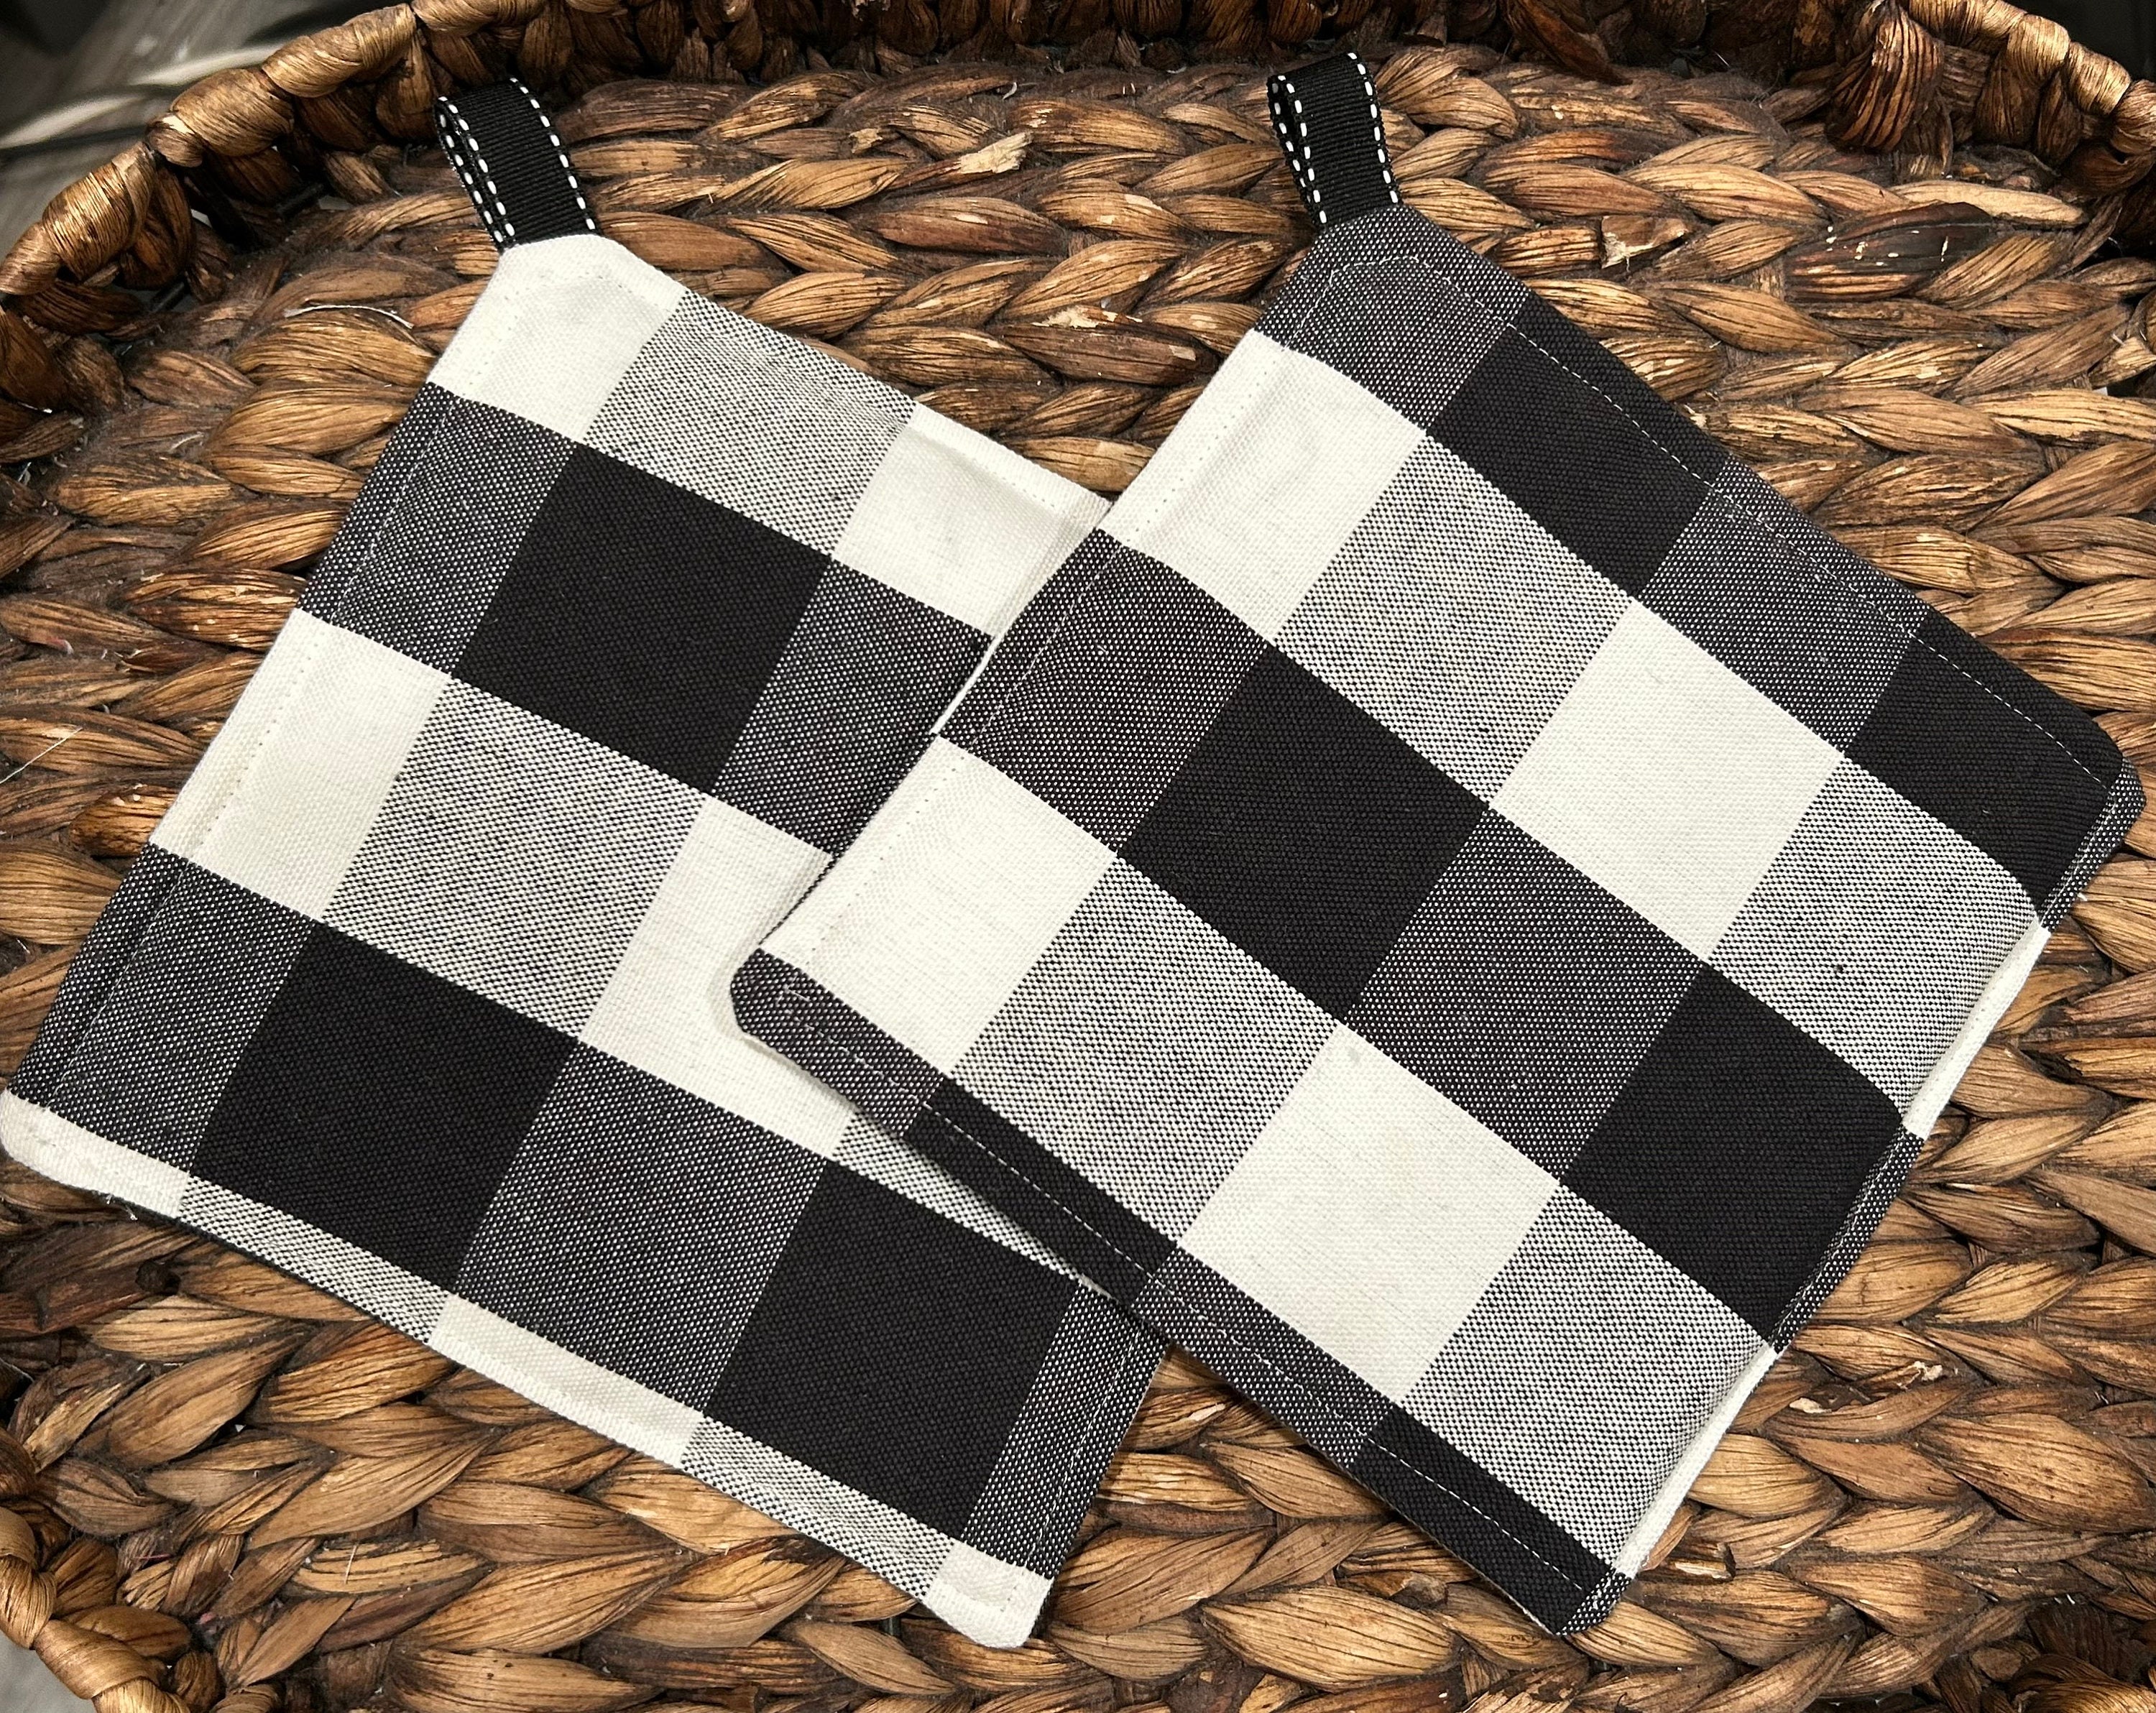 Buffalo Check Oven Mitts and Pot Holders Set of 4